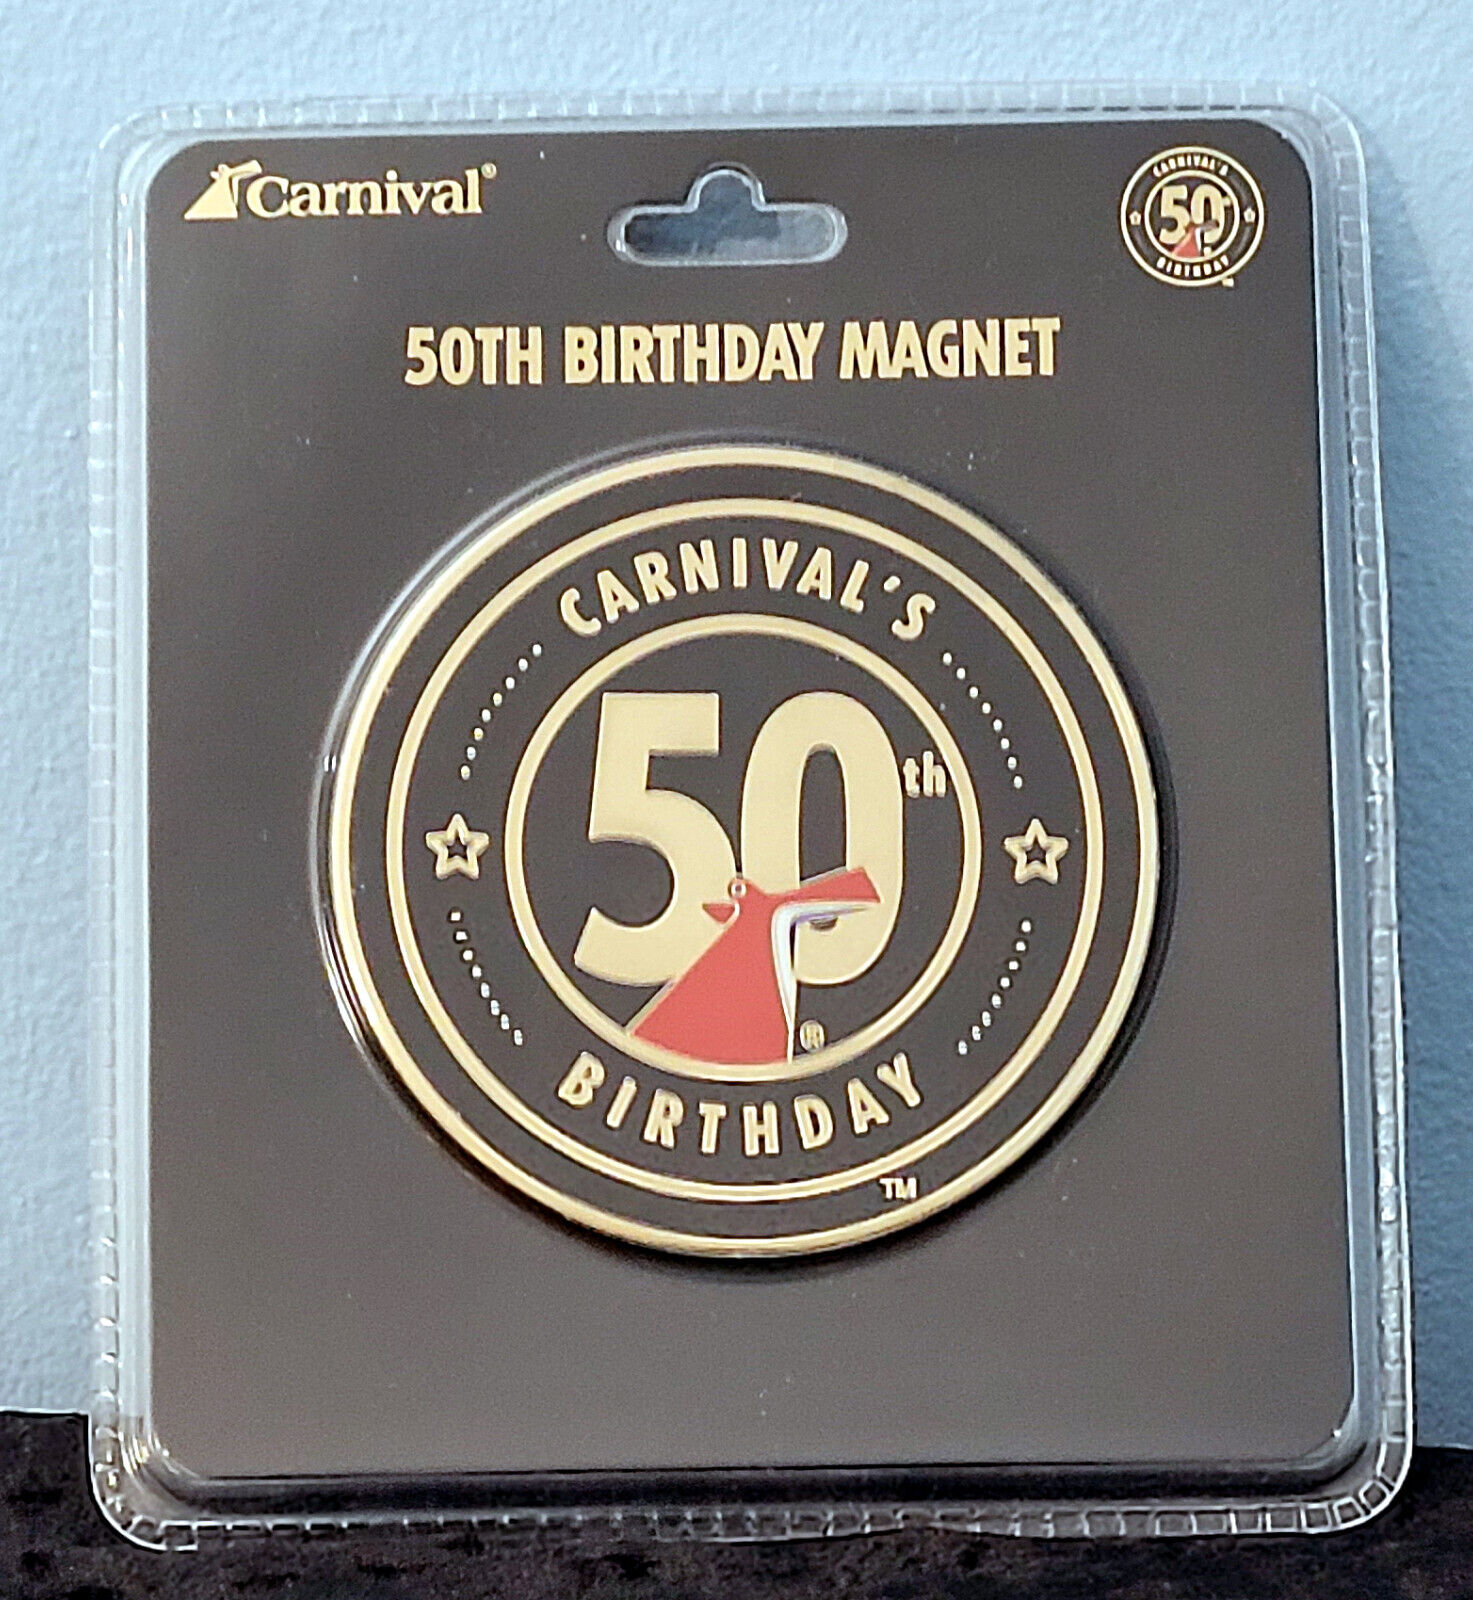 Carnival Cruise Line 50th Birthday flat Logo Magnet 3.5 inches across flexible